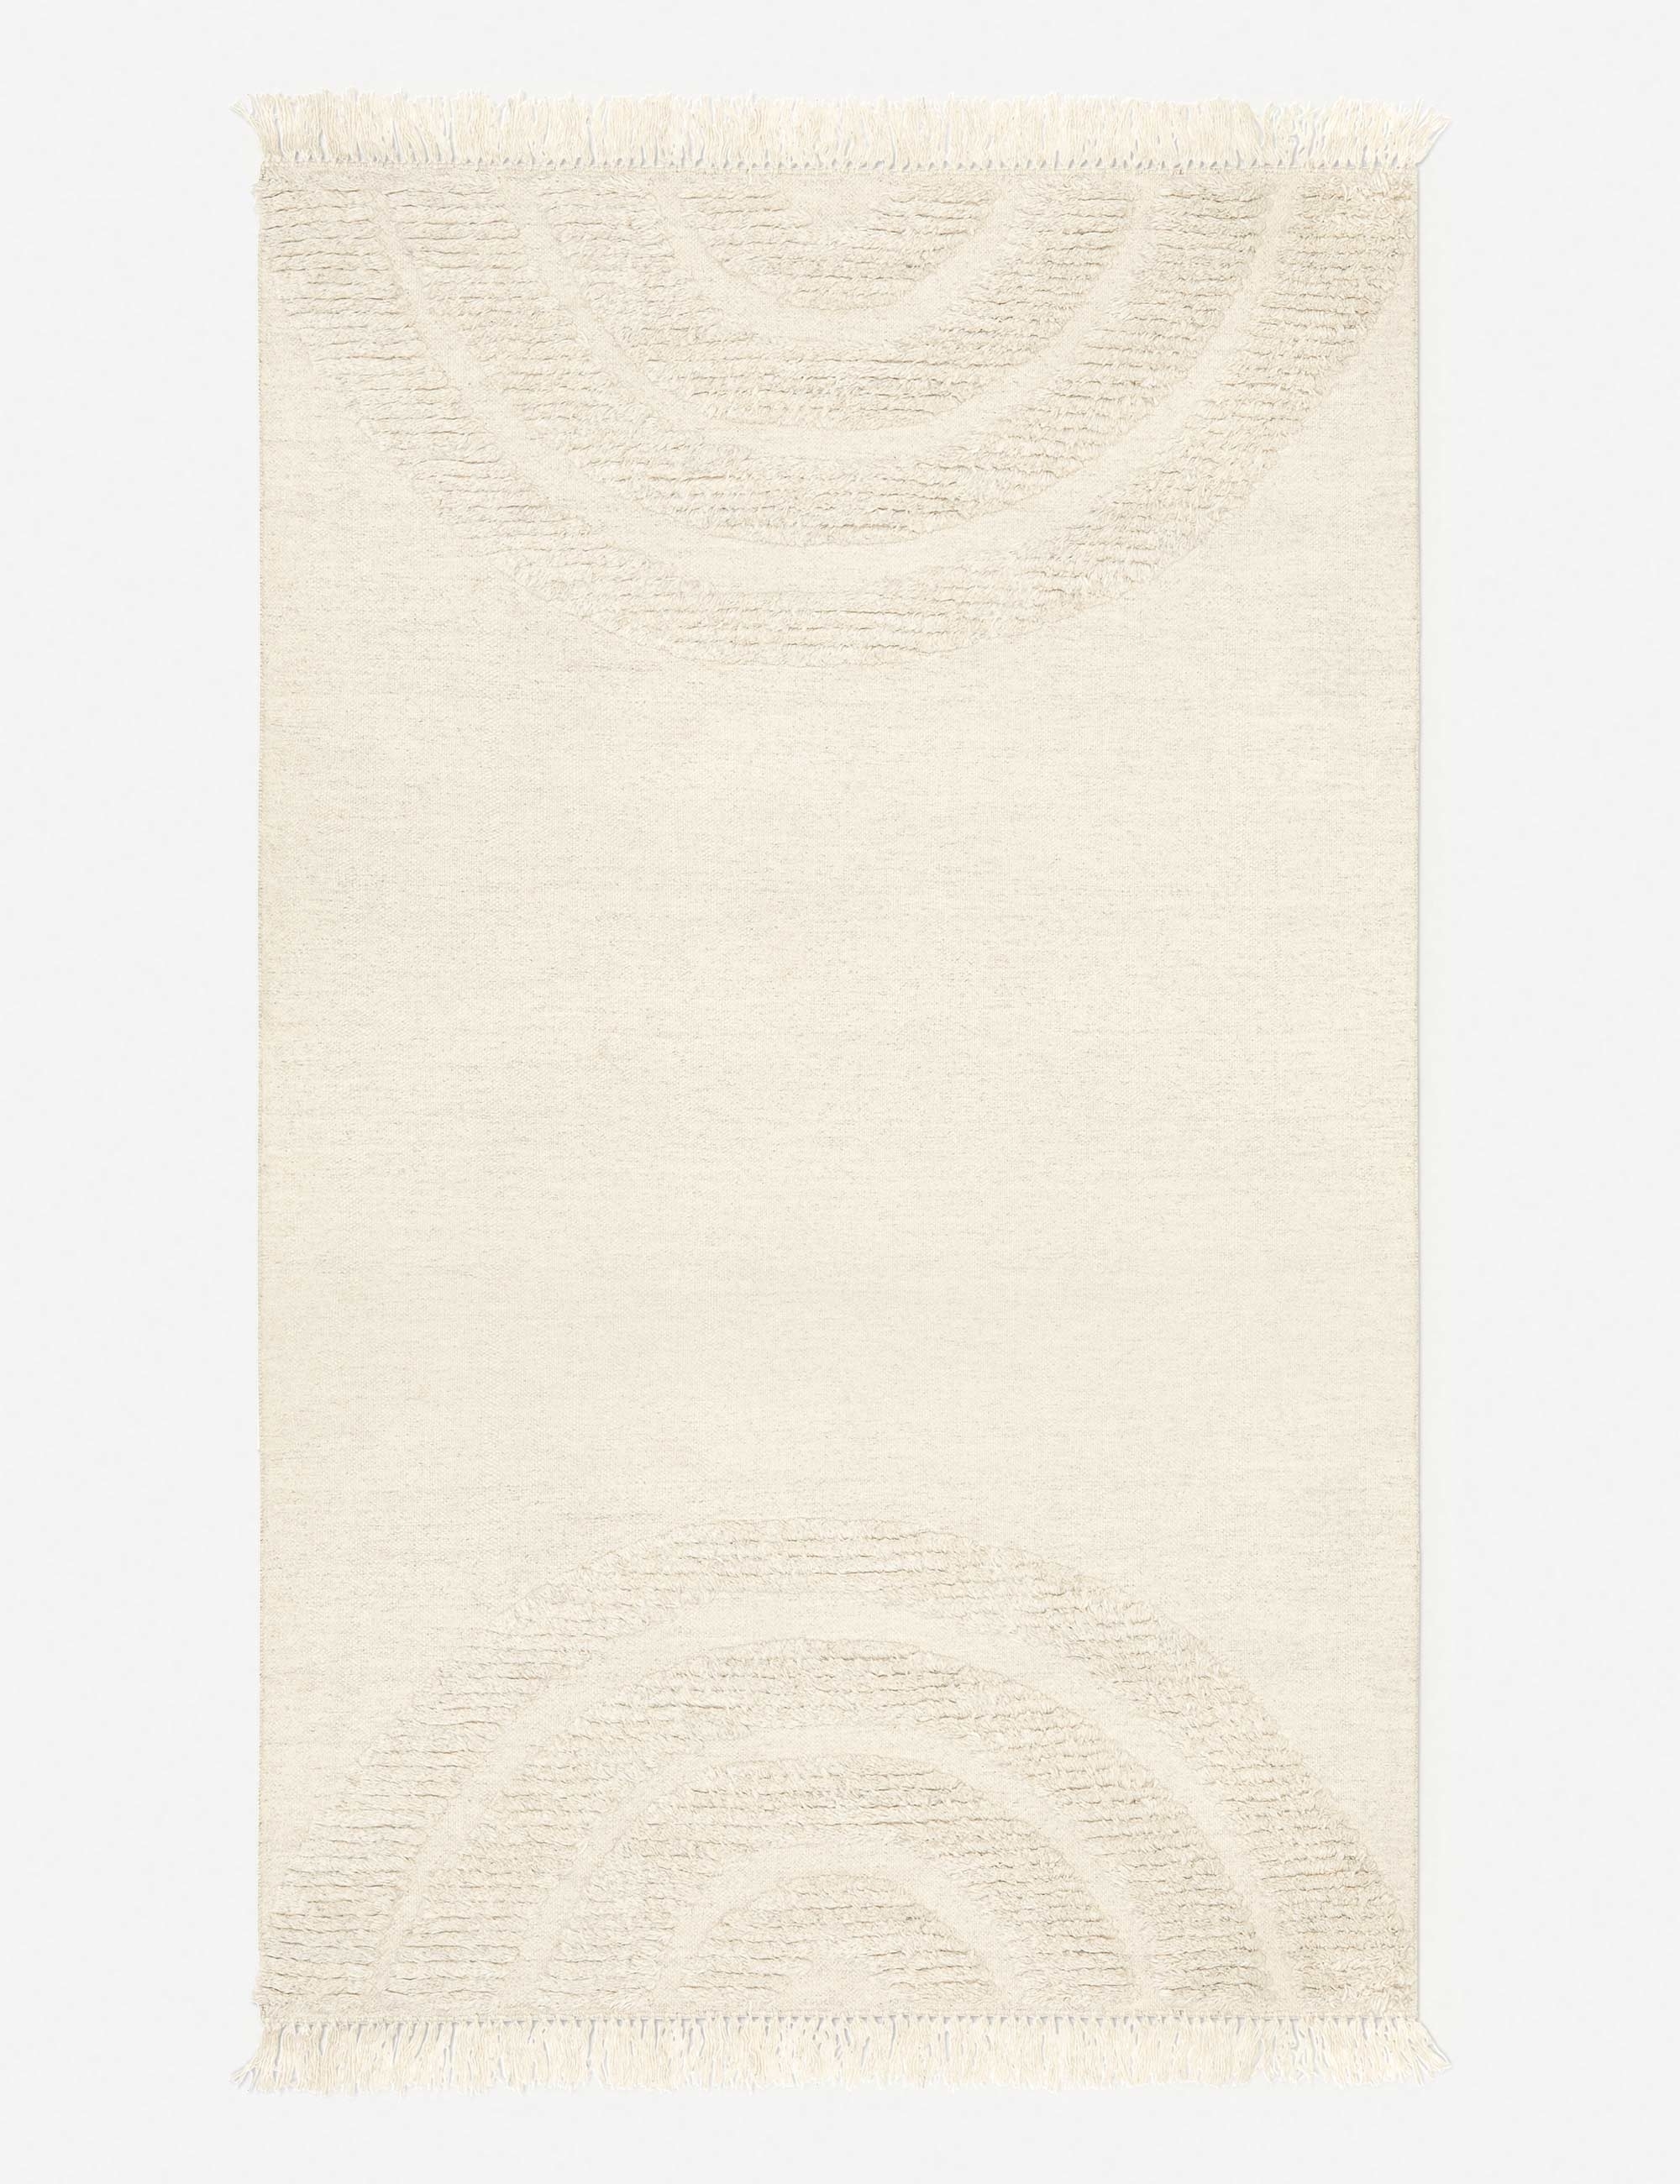 Arches Hand-Knotted Wool Rug by Sarah Sherman Samuel - Image 7